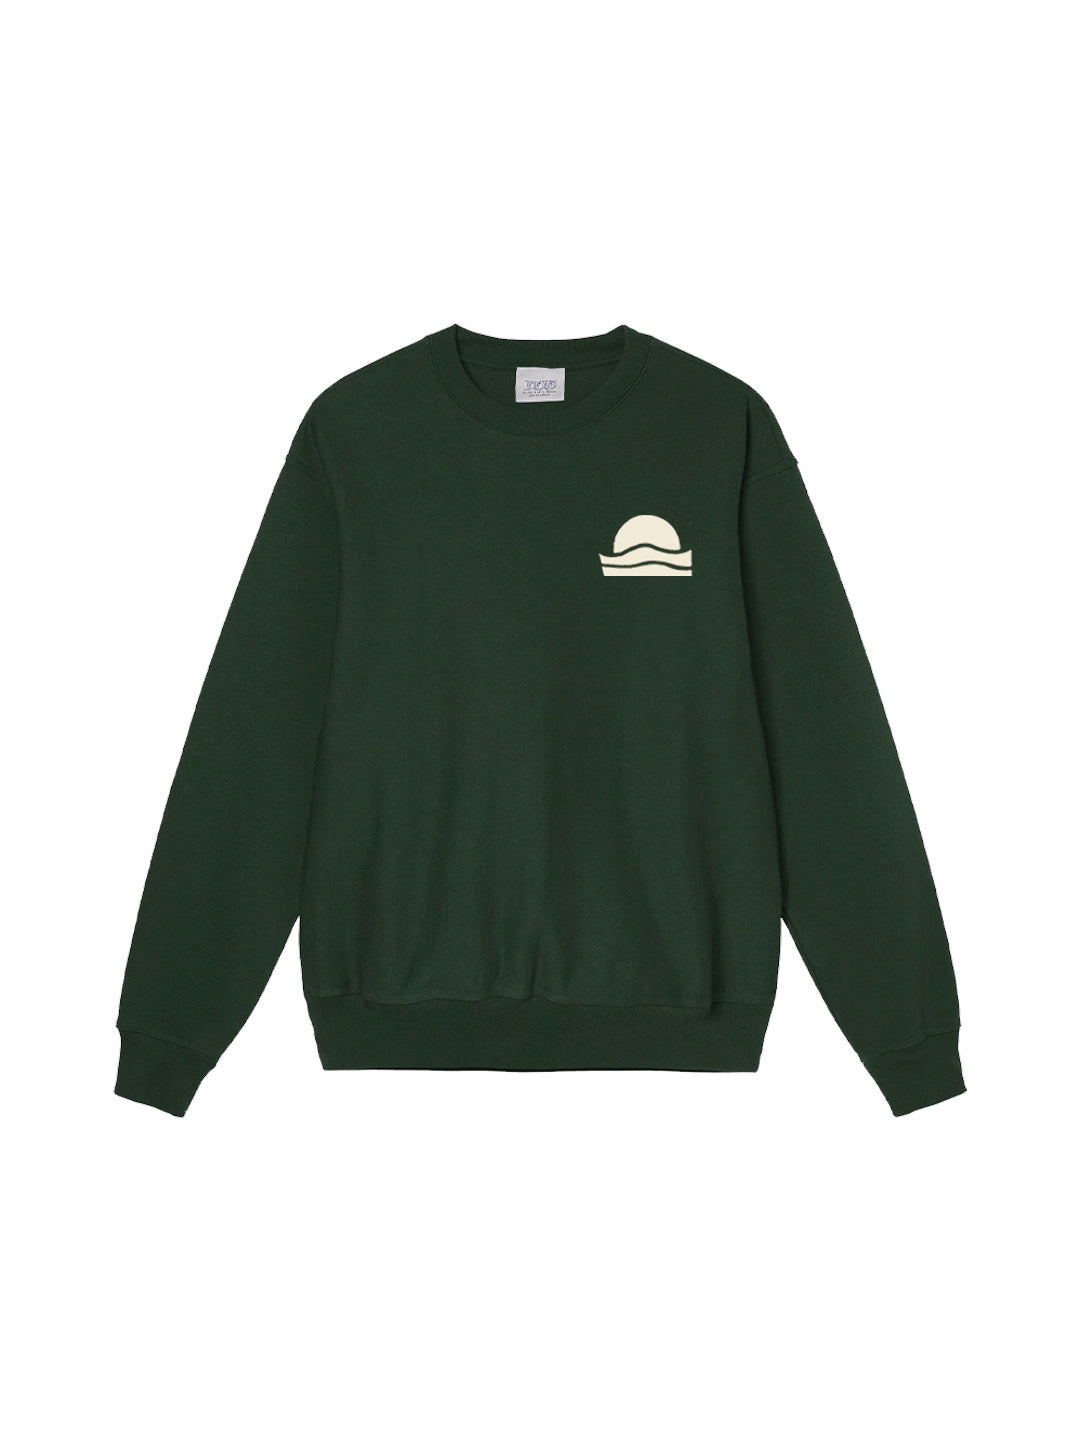 Sunscape Canyon Adult Crewneck Sweatshirt in Forest Green